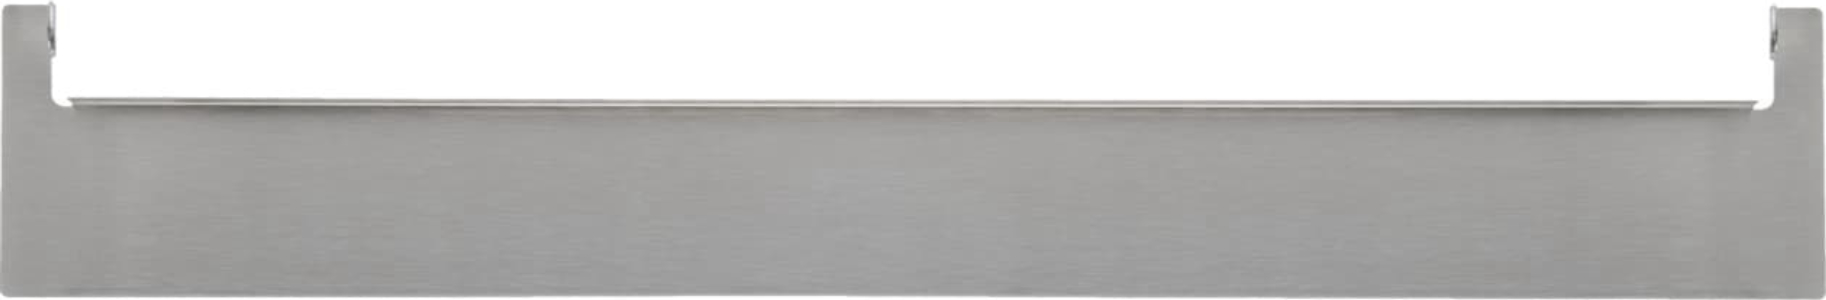 ElectroluxStainless Steel 3 Inch Wall Oven Trim Kit